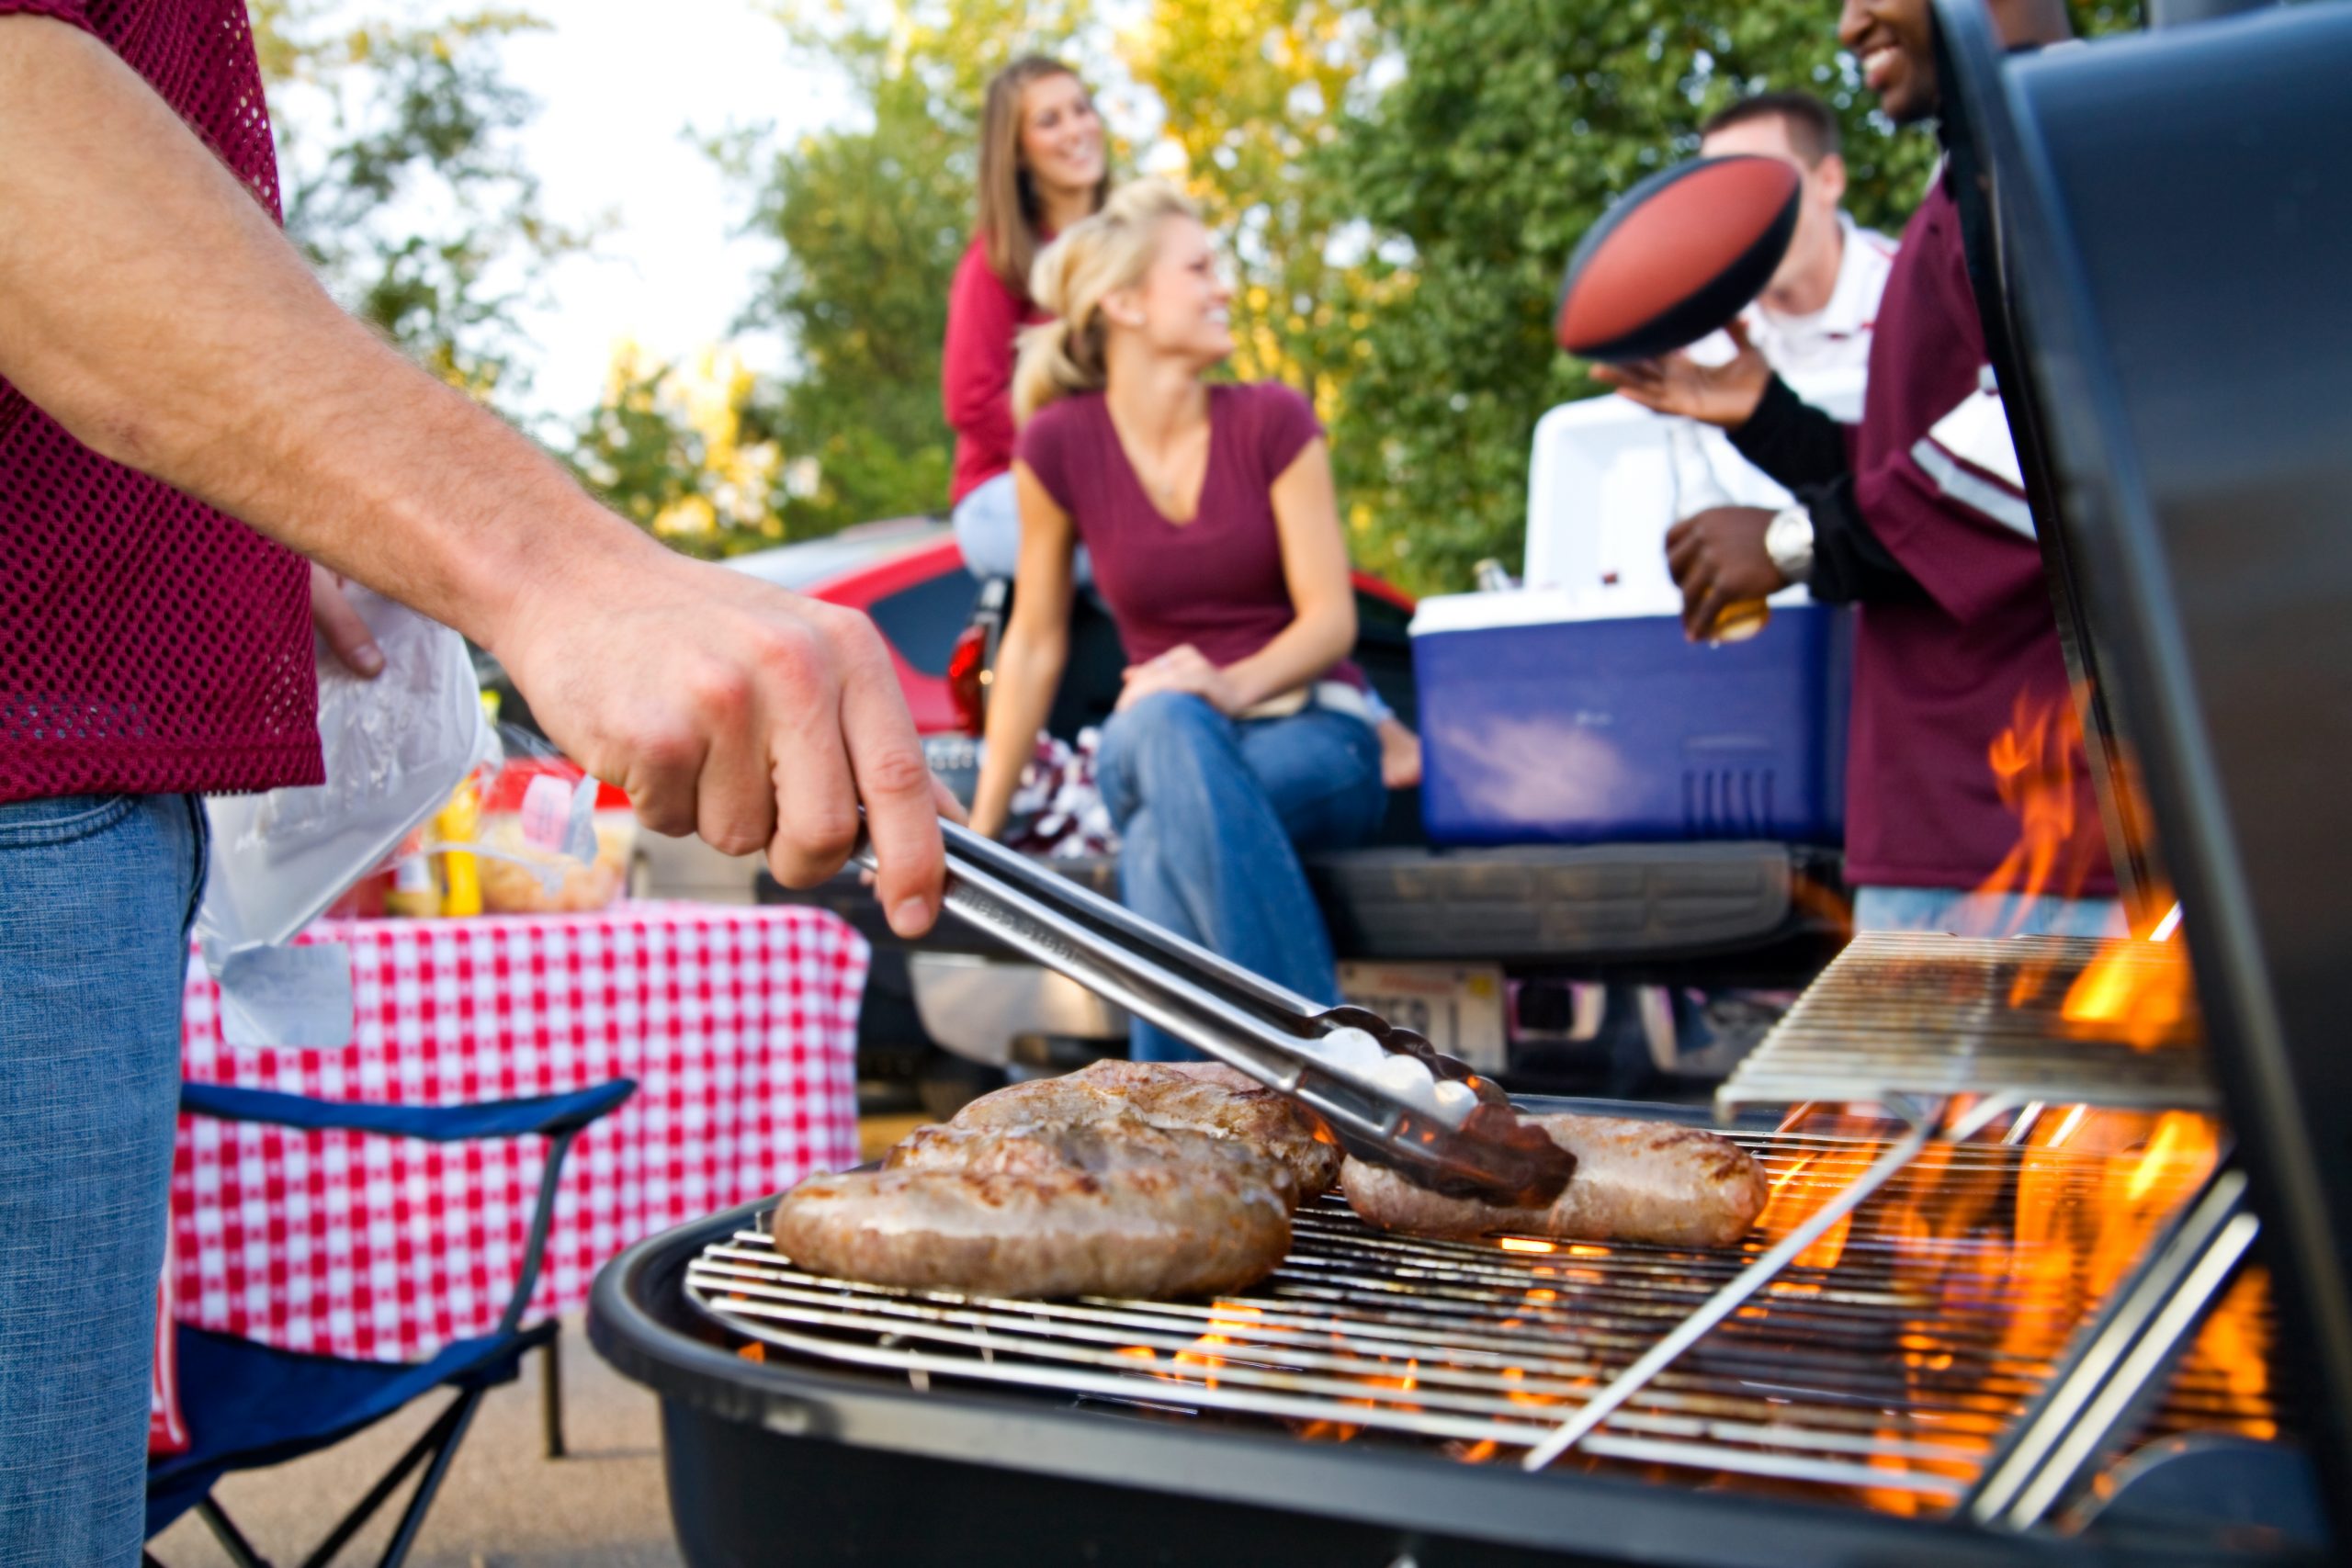 6 grilling safety tips